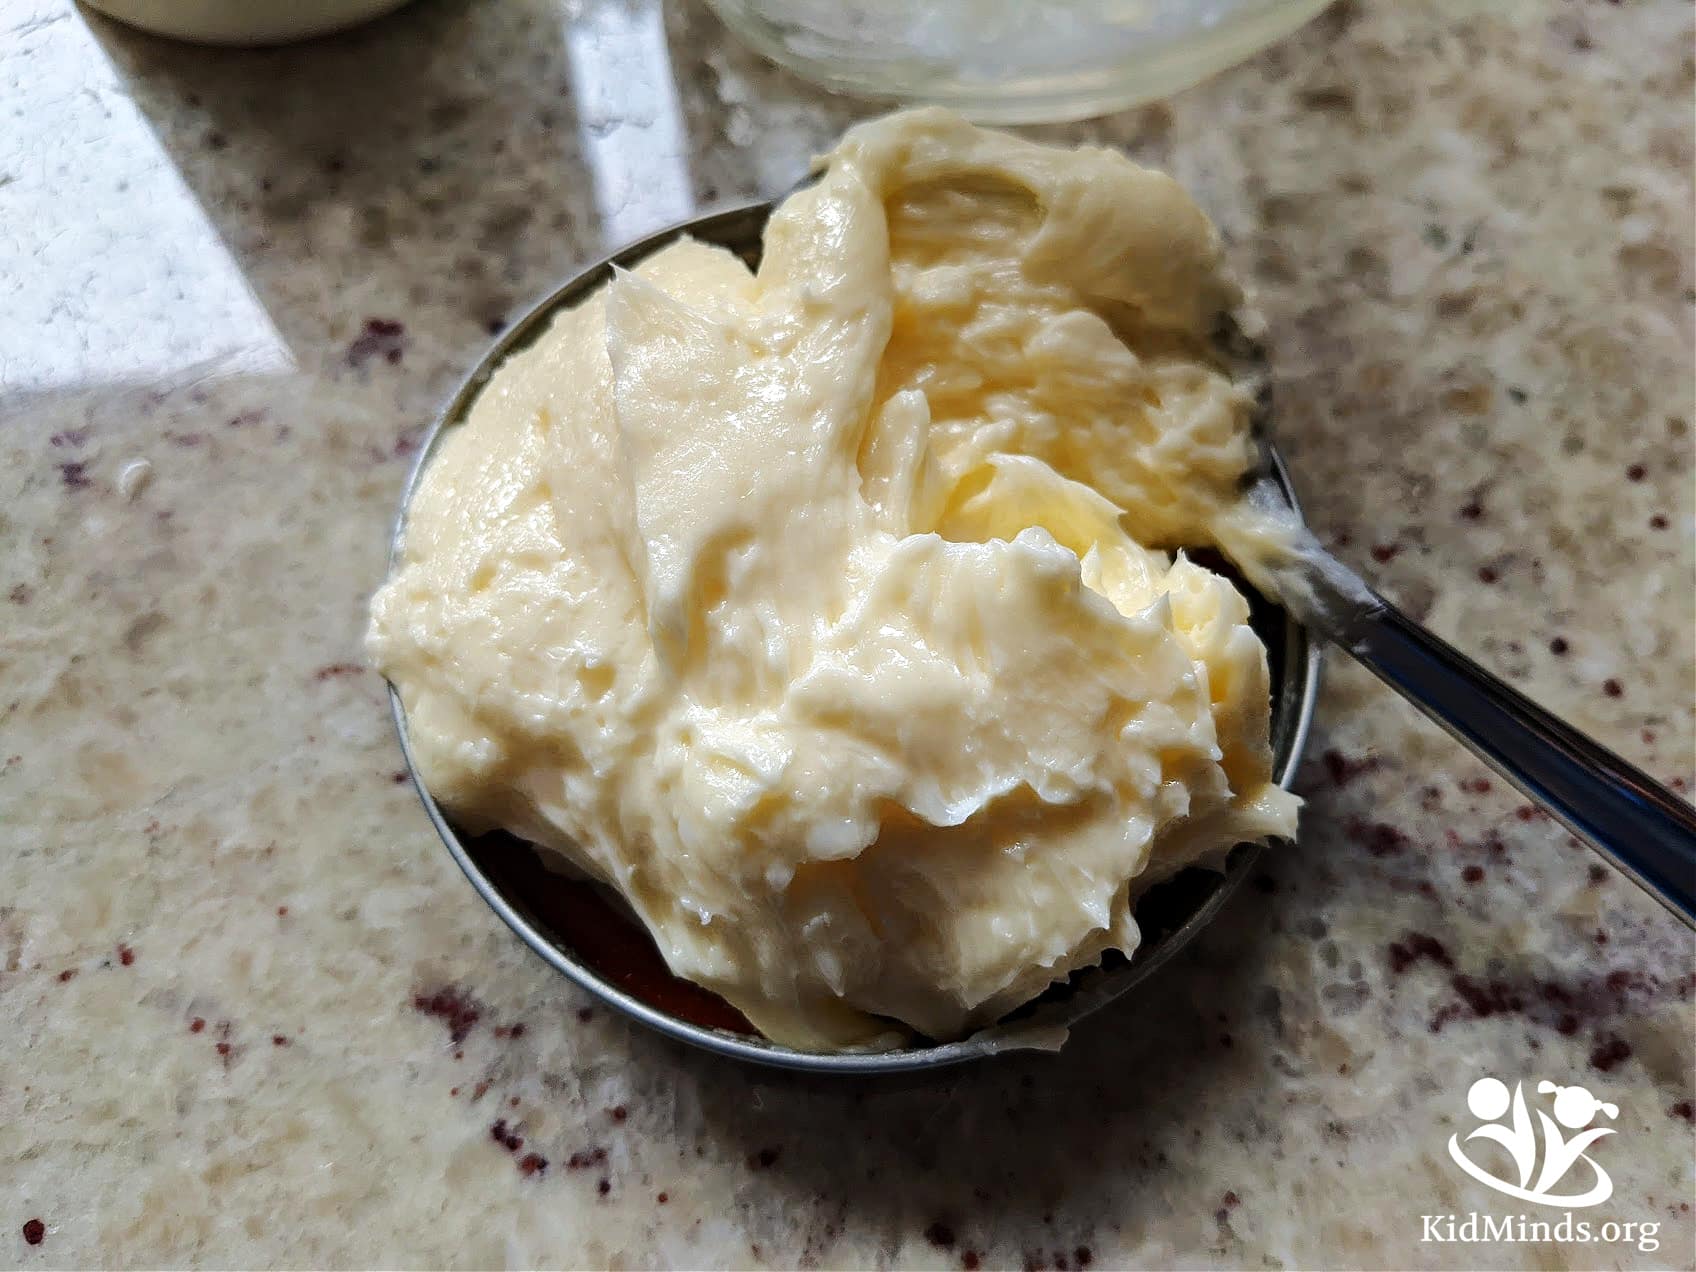 Learn the science of butter making while getting a yummy snack ready. This butter science experiment is good enough to eat.  #kidsactivities #science4kids #kidsscience #stemeducation #stemkids #homeschool #learning